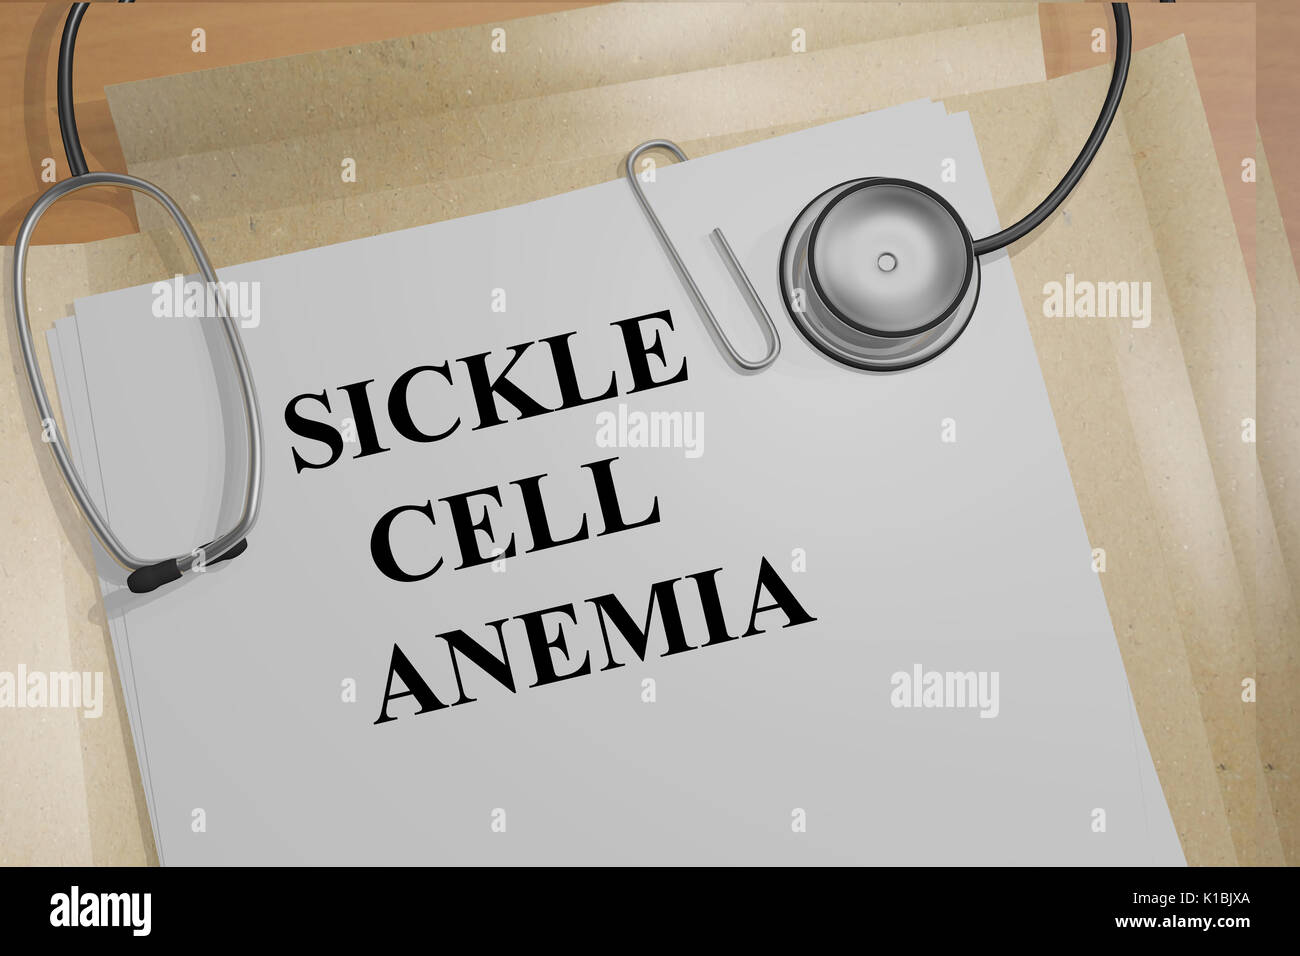 3D illustration of SICKLE CELL ANEMIA title on medical documents. Medicial concept. Stock Photo